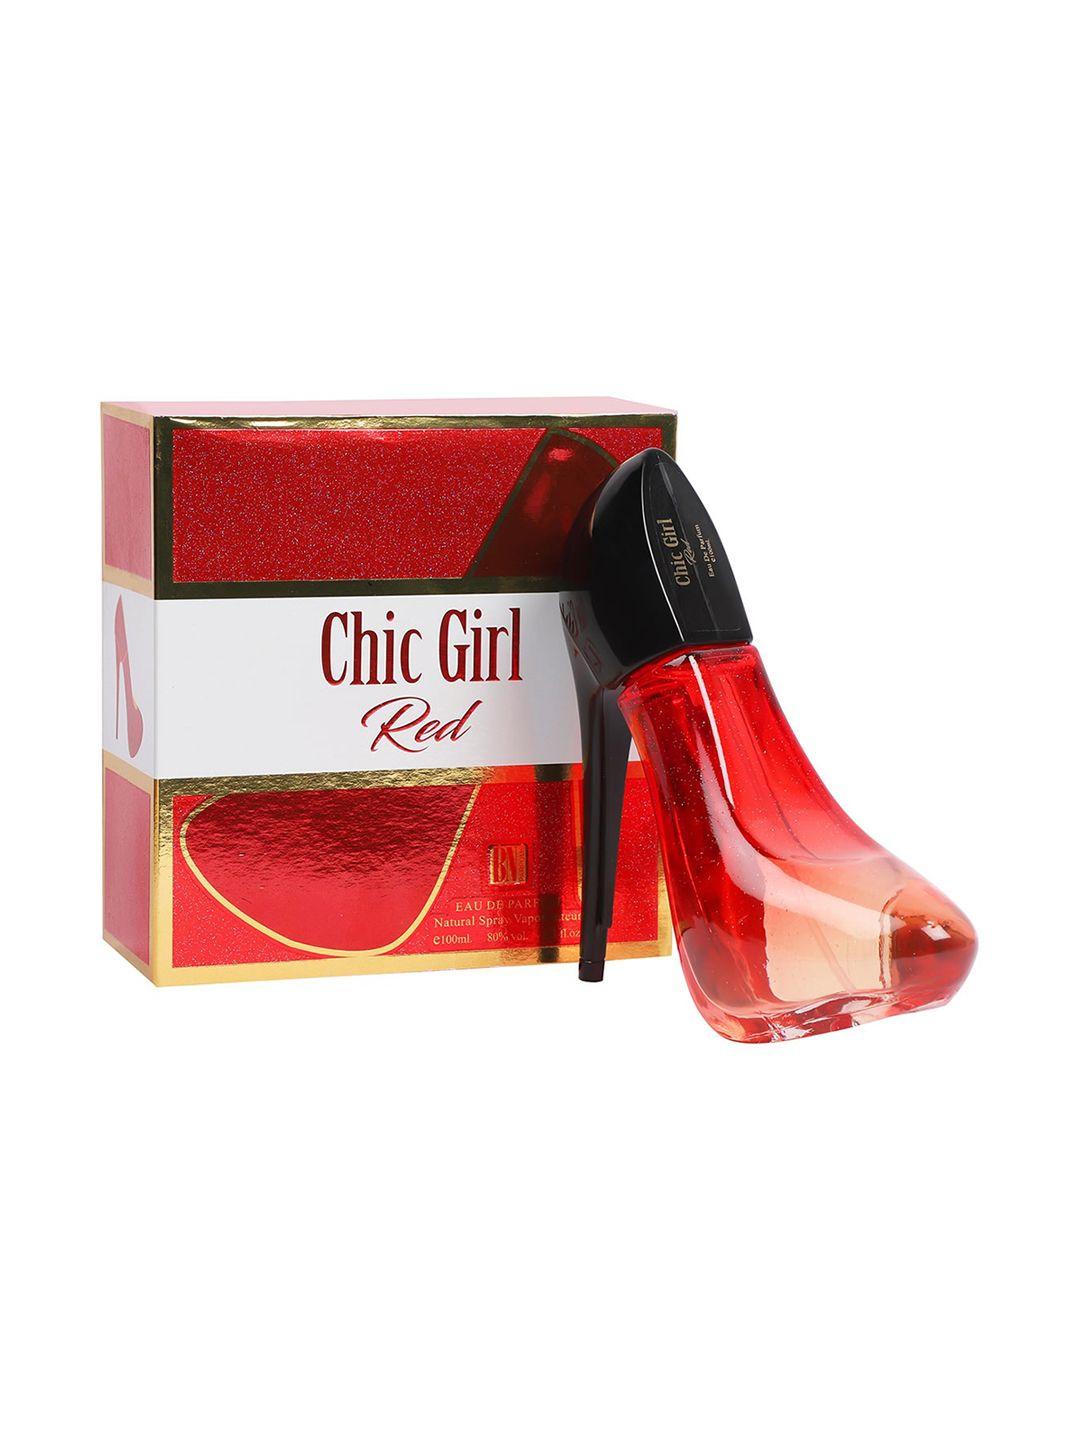 bn parfums women chic girl red long-lasting eau de parfum with soothing fragrance - 100ml